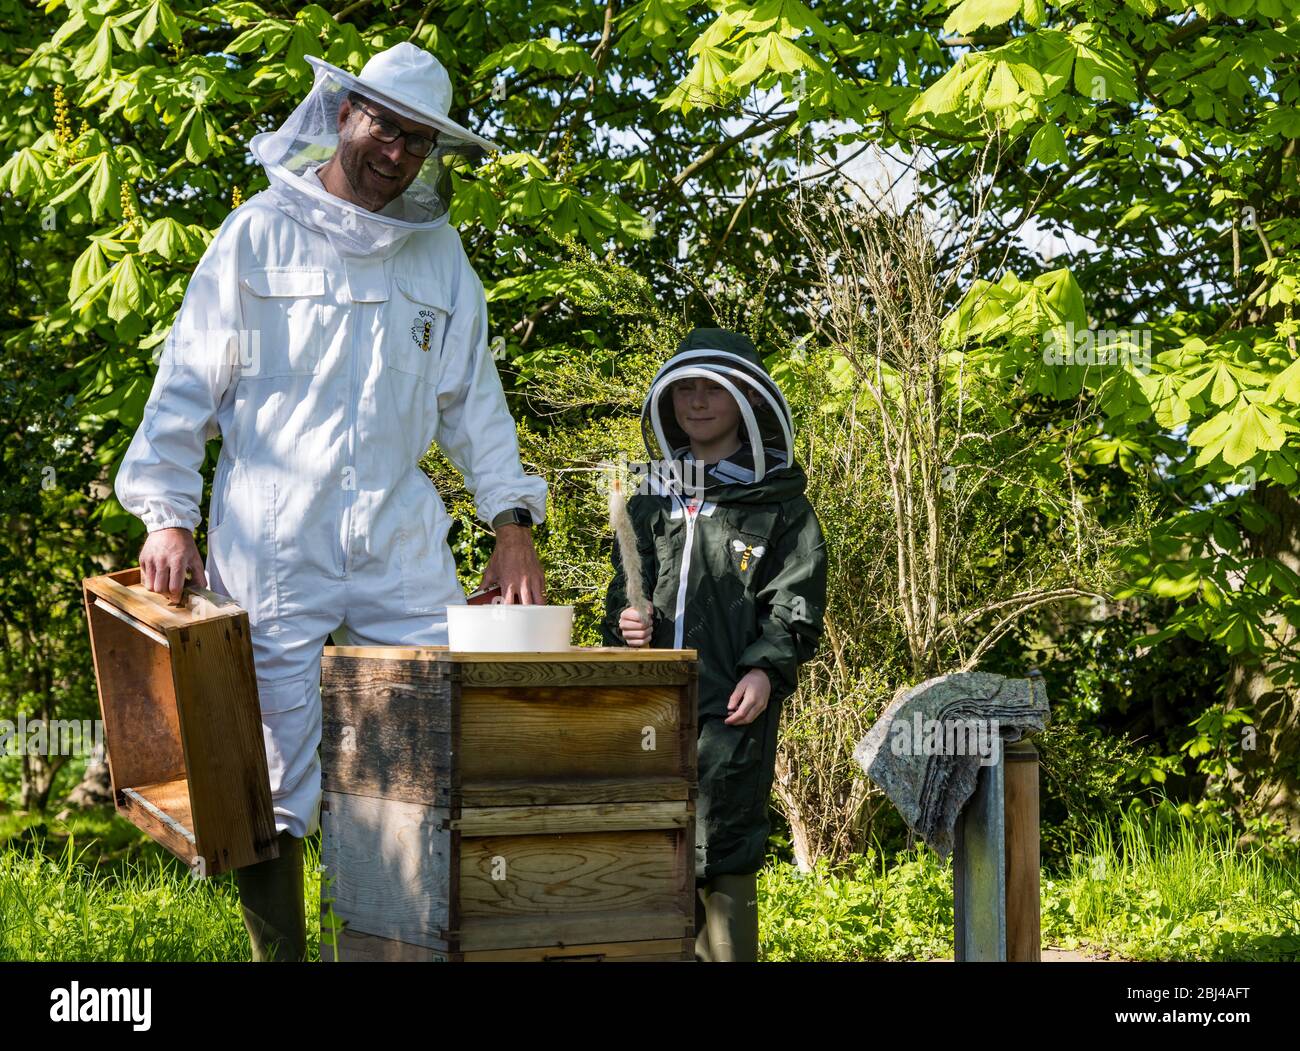 Camptoun, East Lothian, Scotland, United Kingdom. 28th Apr, 2020. A community in lockdown: residents in a small rural community show what life in lockdown is like for them. Pictured: Shane and his son Charlie, aged 9 years, are in their second year of keeping honey bees and hope to produce jars of honey this year. The hive contains around 20,000 bees Stock Photo